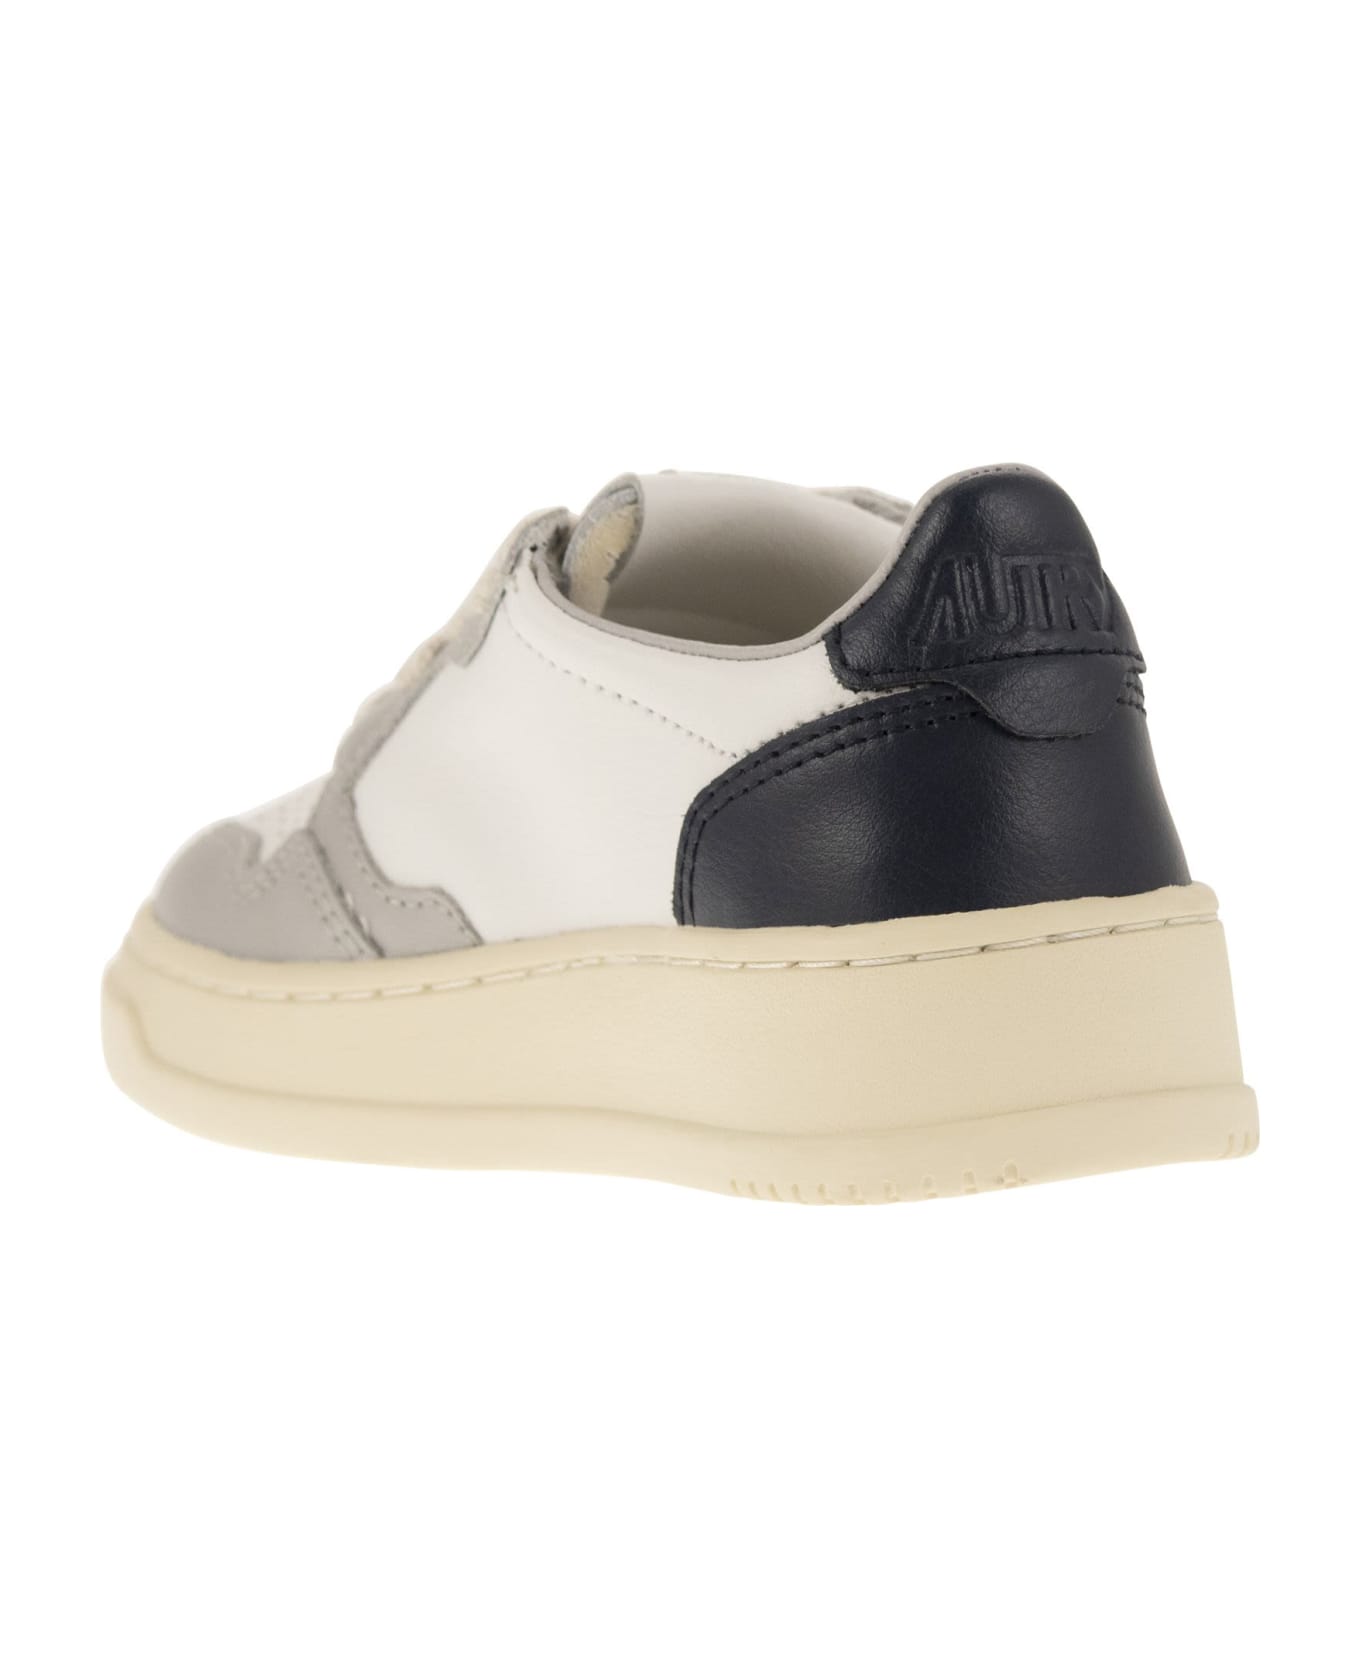 Autry Medalist Low - Two-tone Trainer - White/grey シューズ